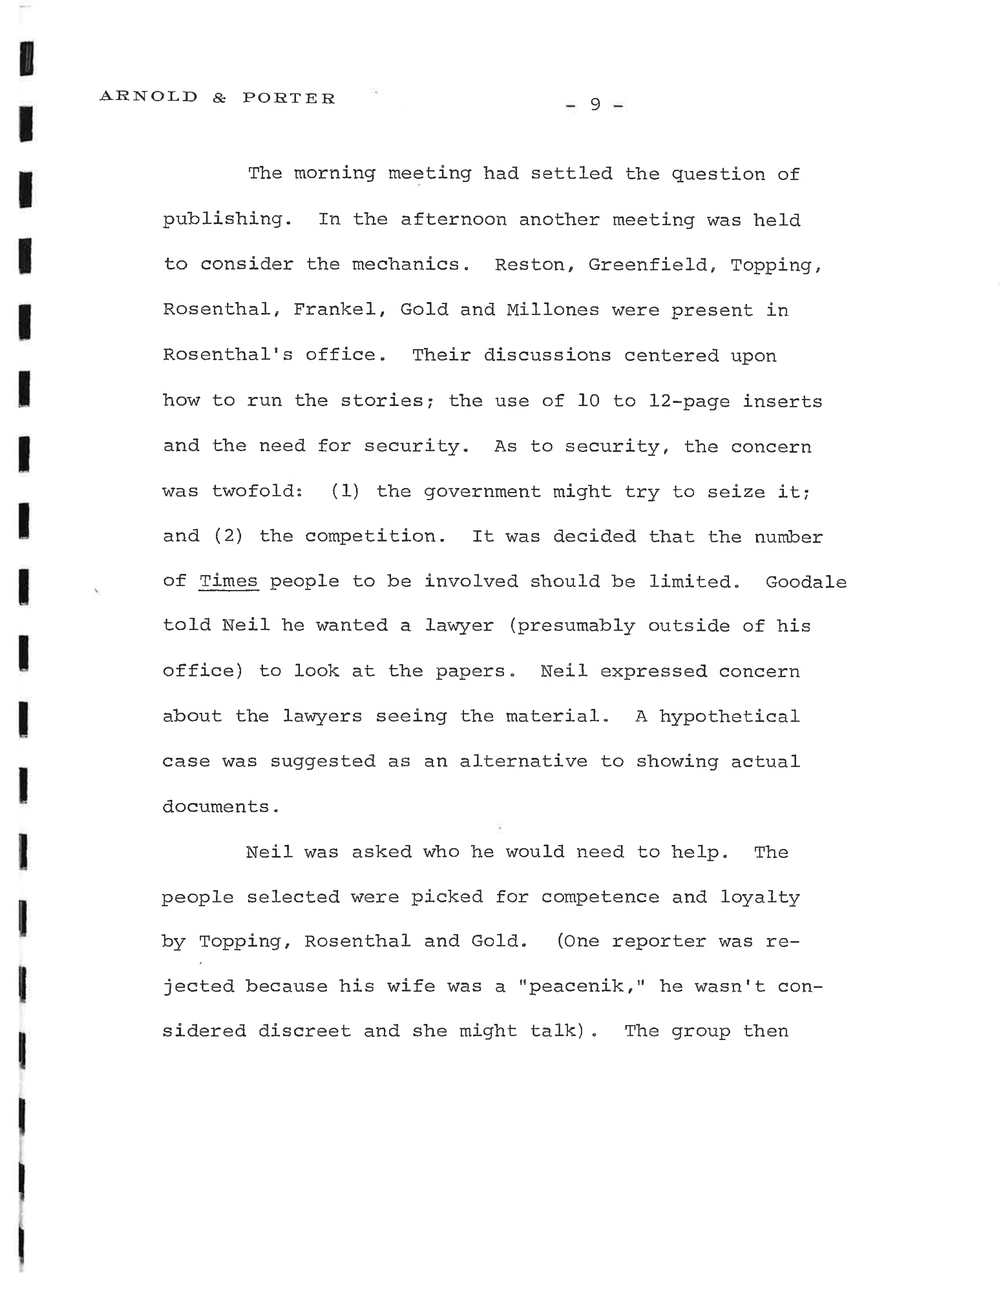 Page 9 from Rogovin Sheehan memo